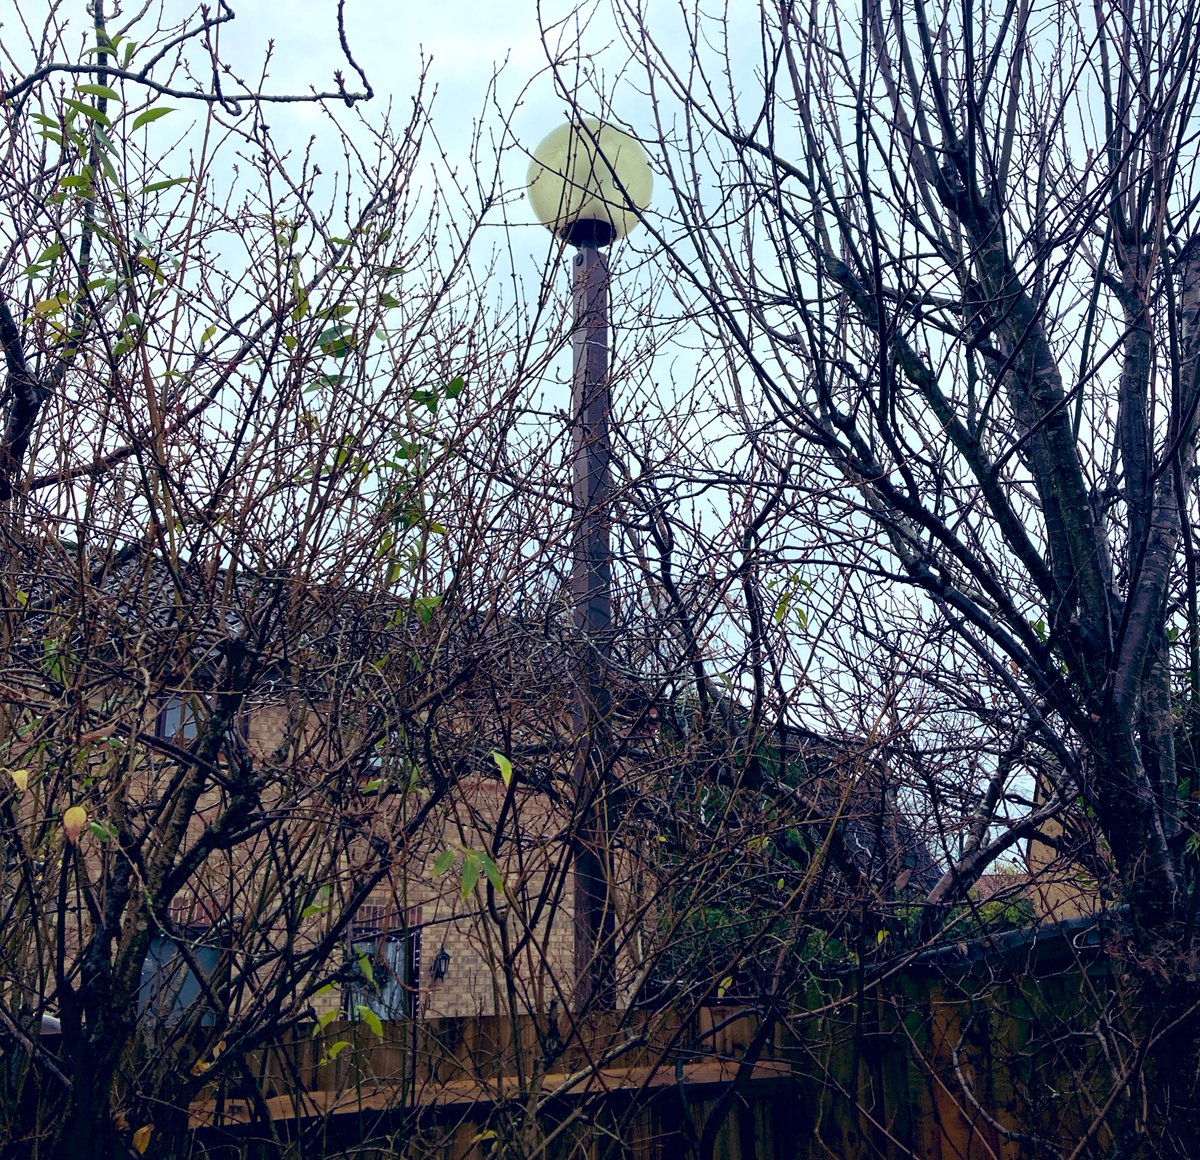 The Milton Keynes globe lights on our estate, including the one at the bottom of our garden, are being replaced today with downlighters